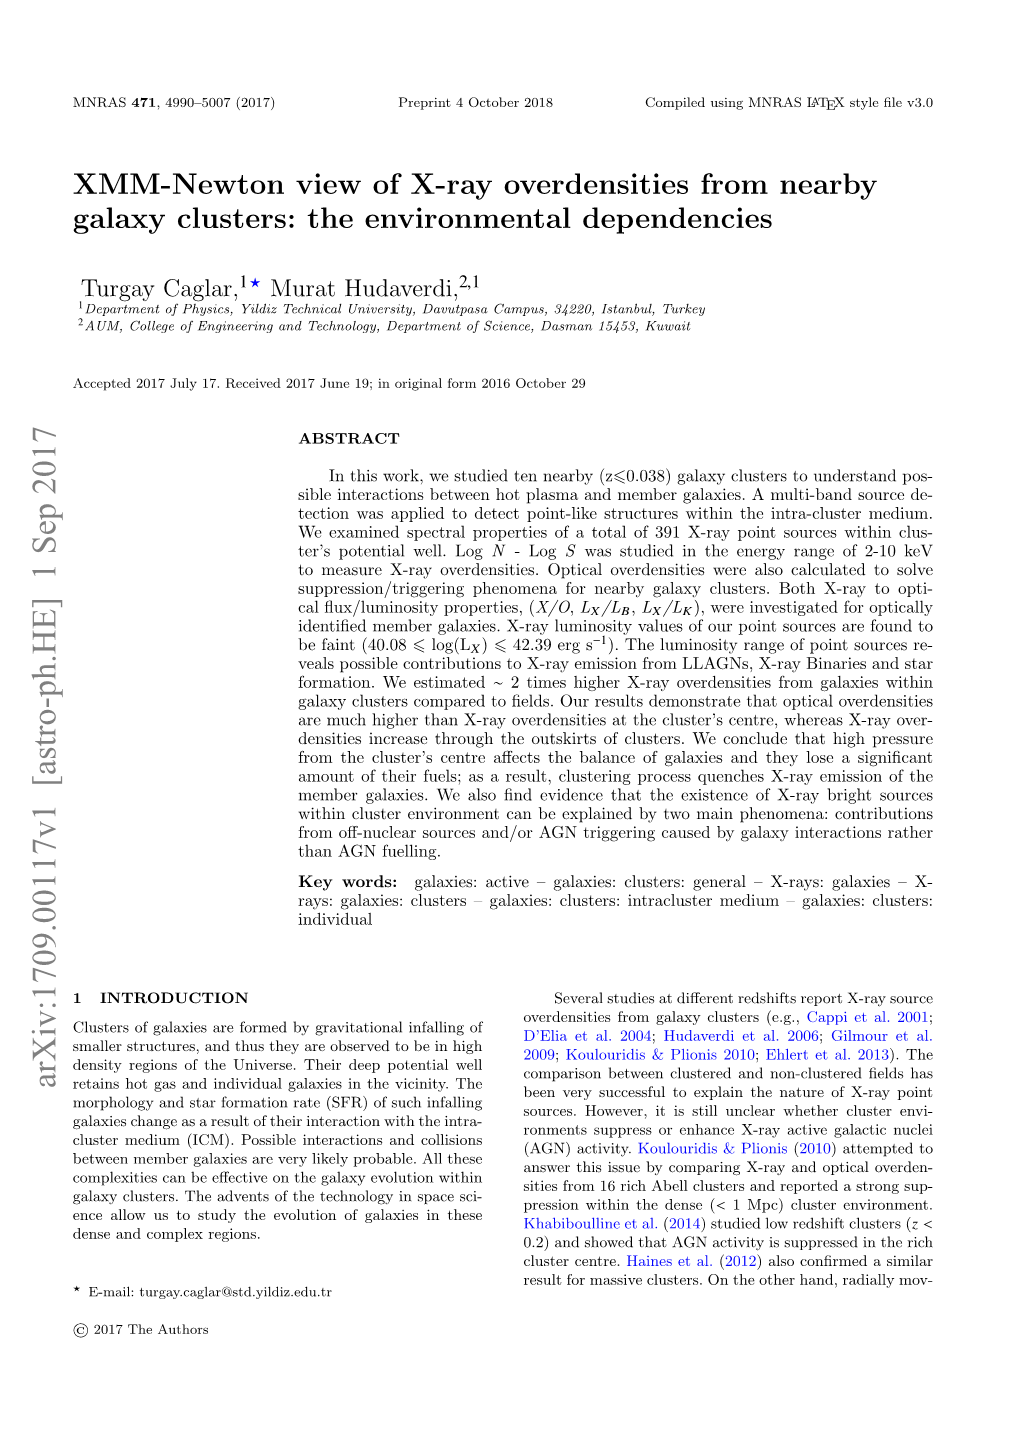 XMM-Newton View of X-Ray Overdensities from Nearby Galaxy Clusters: the Environmental Dependencies